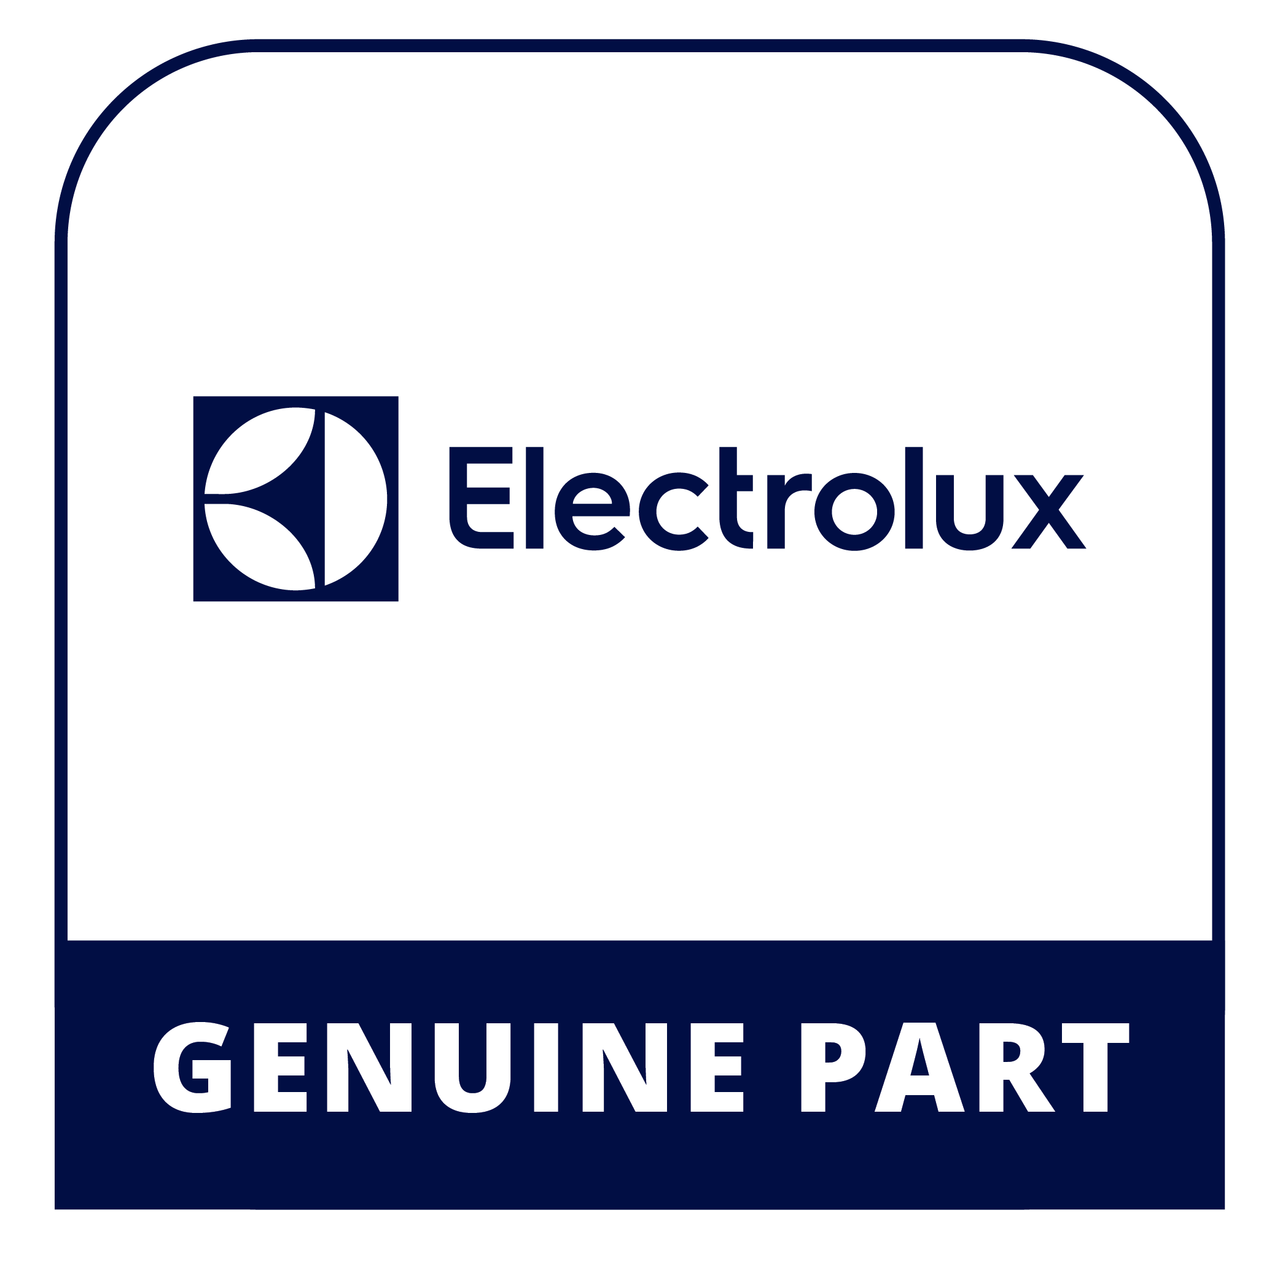 Frigidaire - Electrolux 318205337 Owners Manual - Genuine Electrolux Part